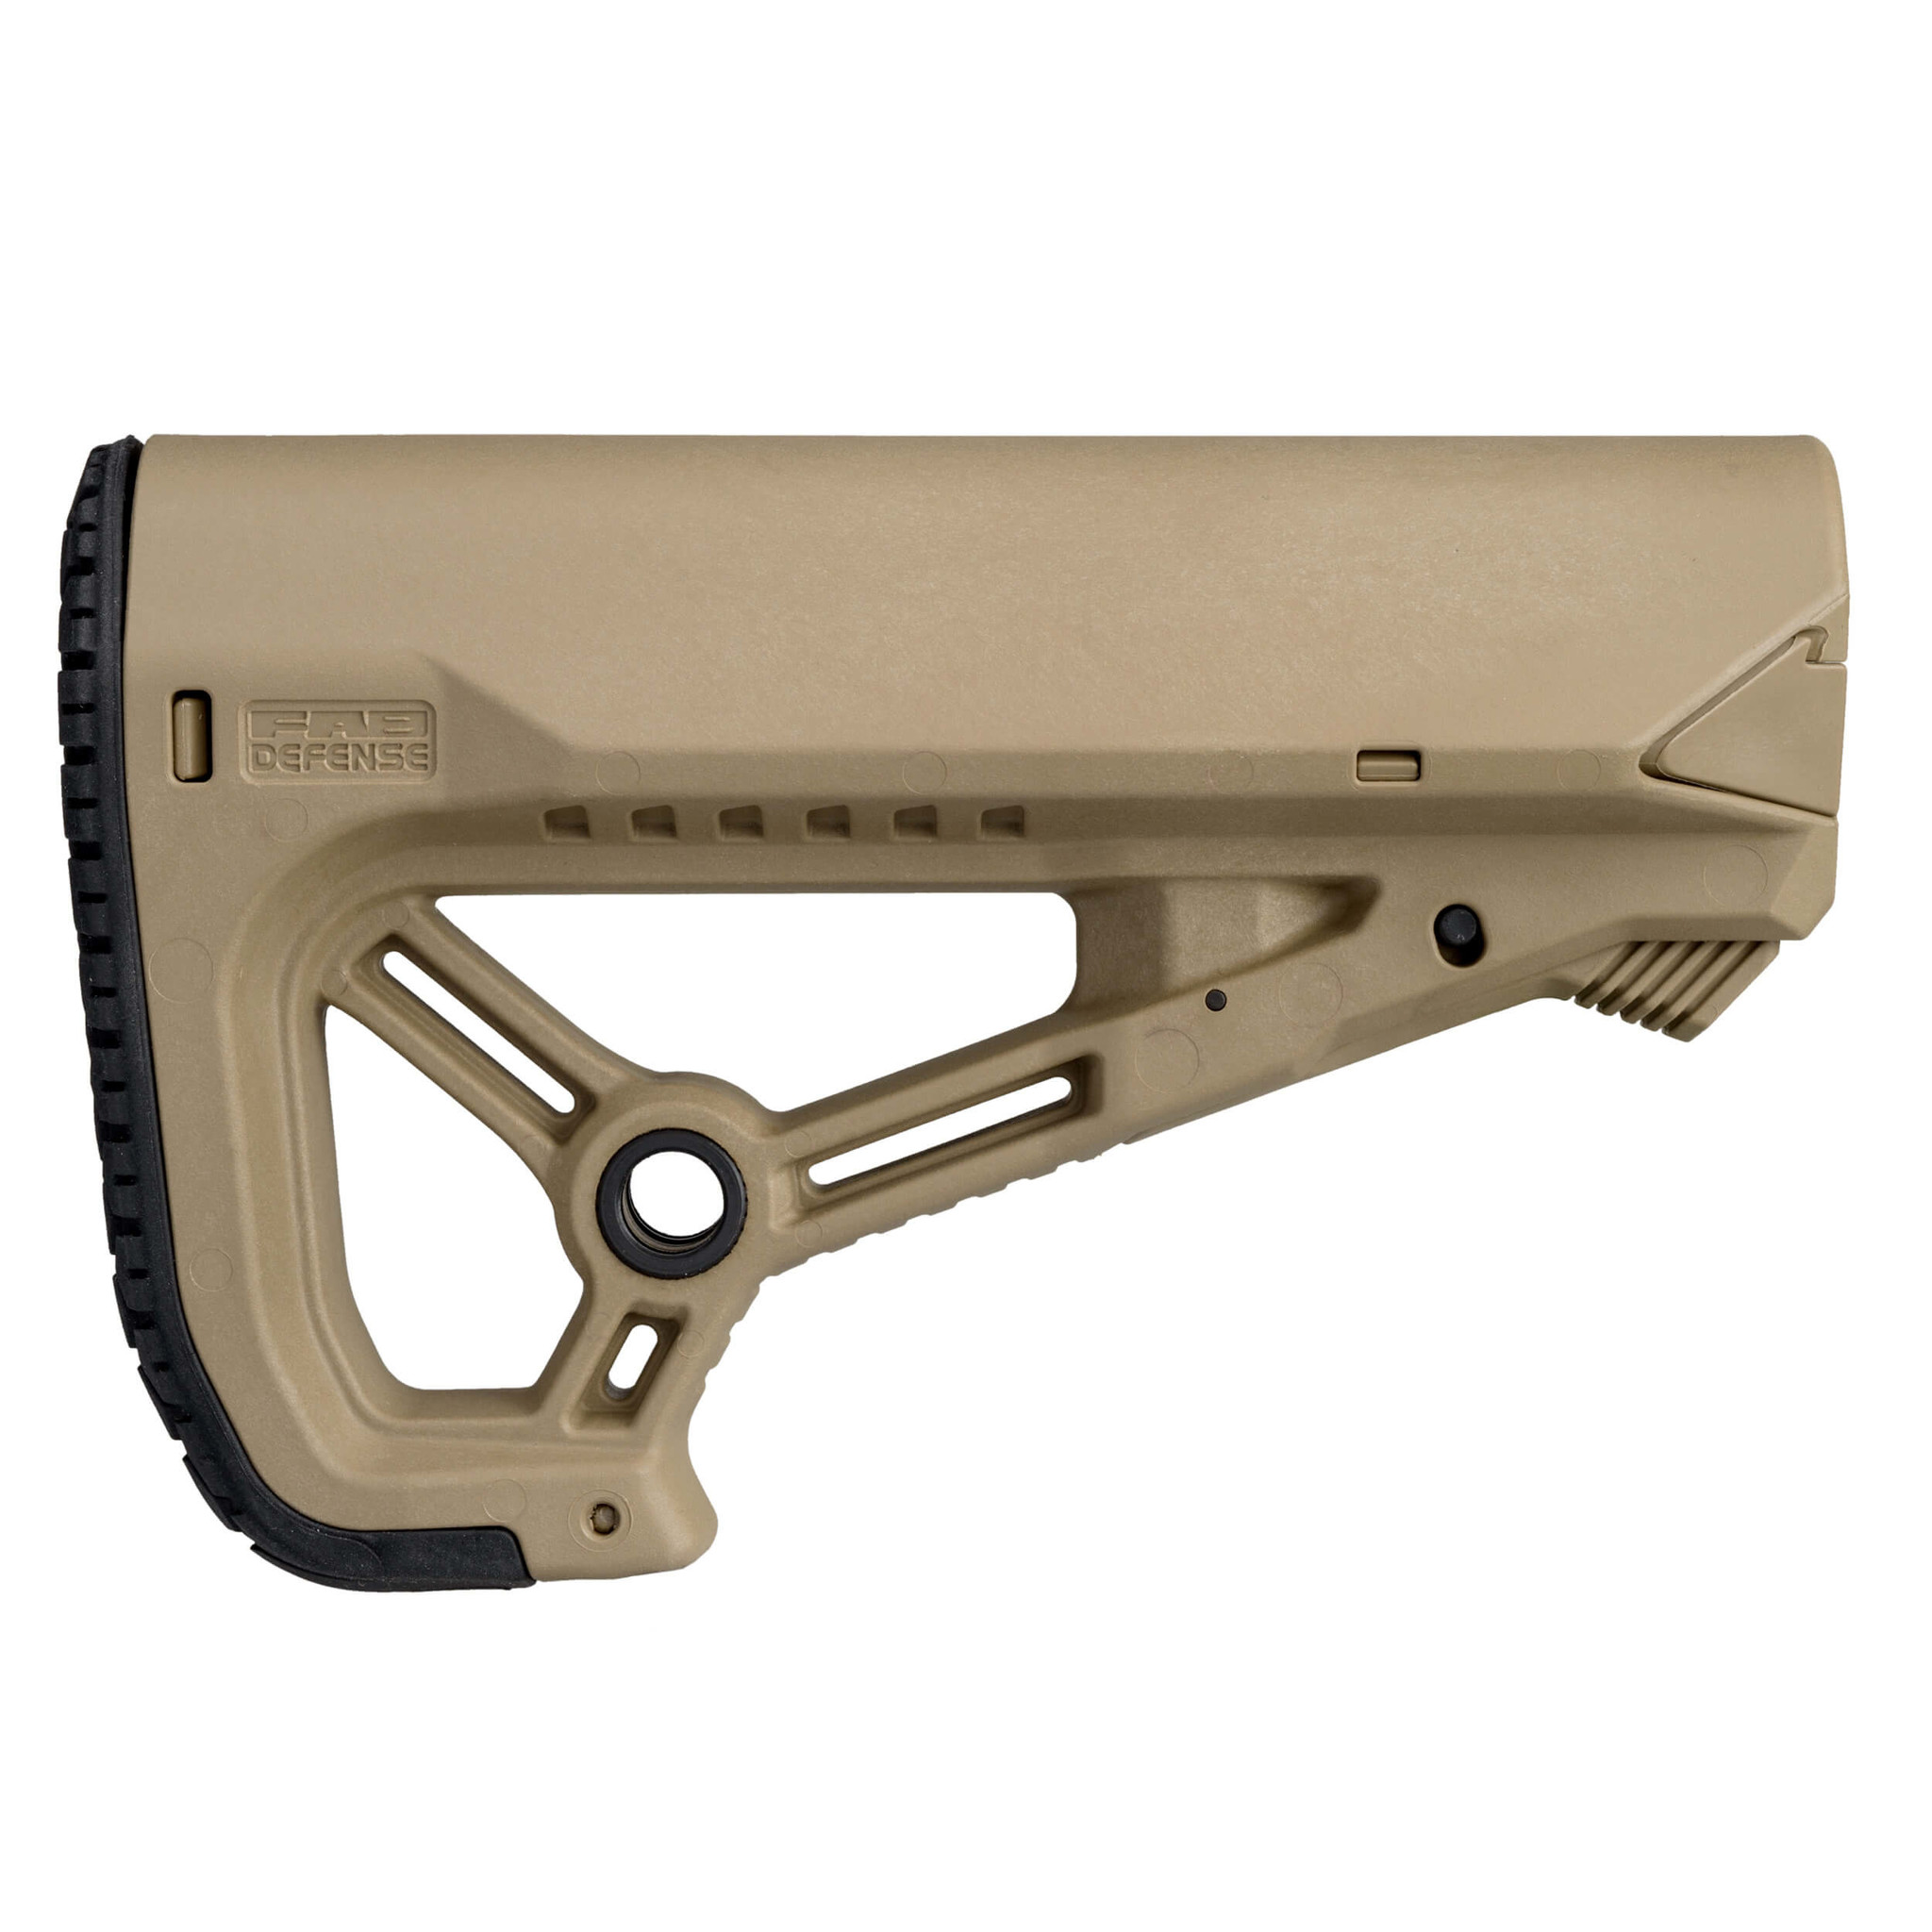 FAB Defense GL-CORE AR15/M4 Buttstock for Mil-Spec and Commercial Tubes - TAN